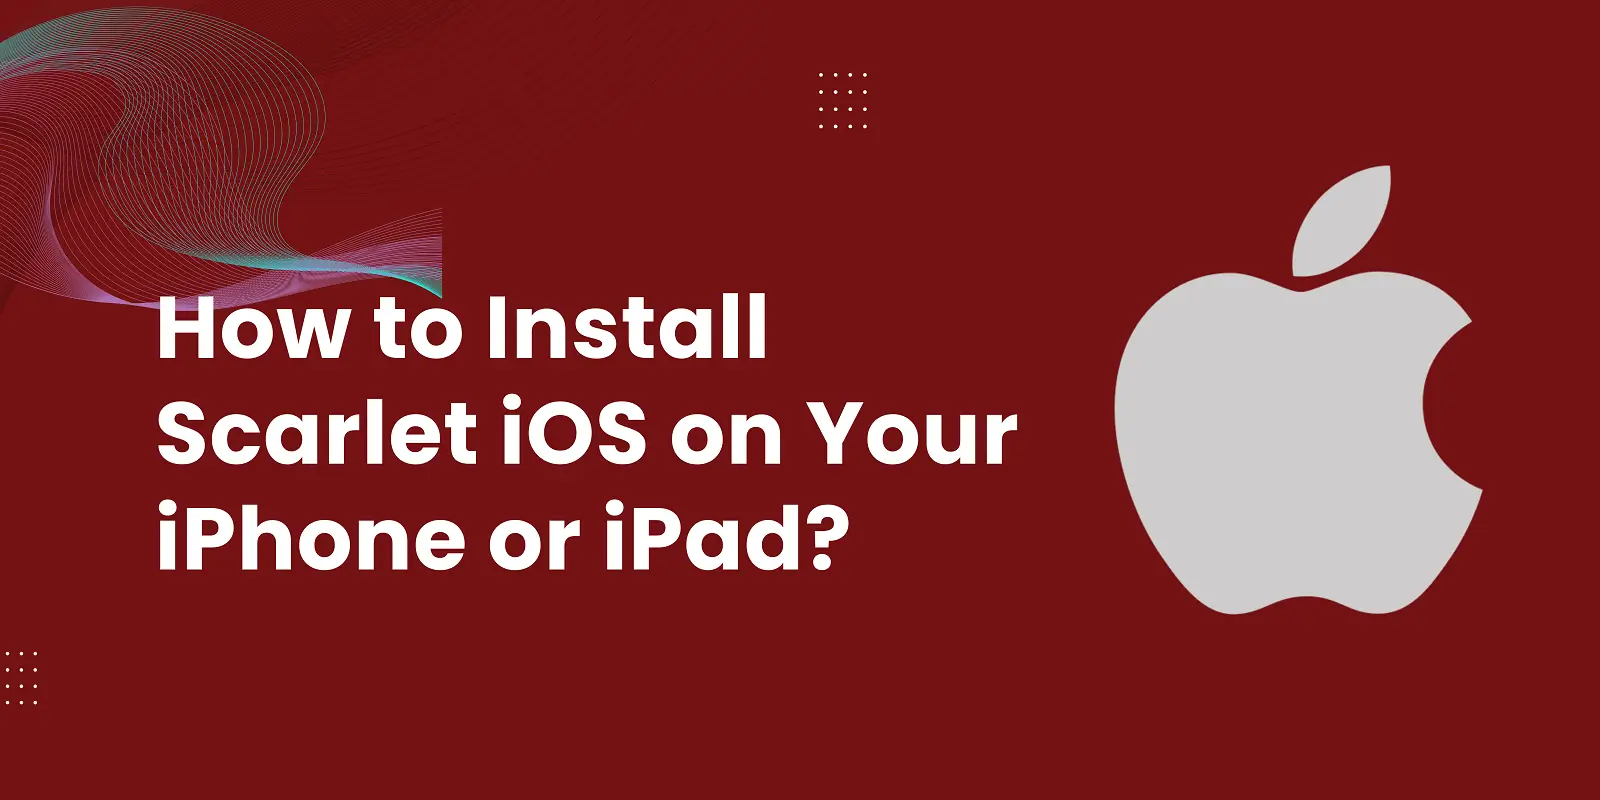 How to Install Scarlet iOS on Your iPhone or iPad?